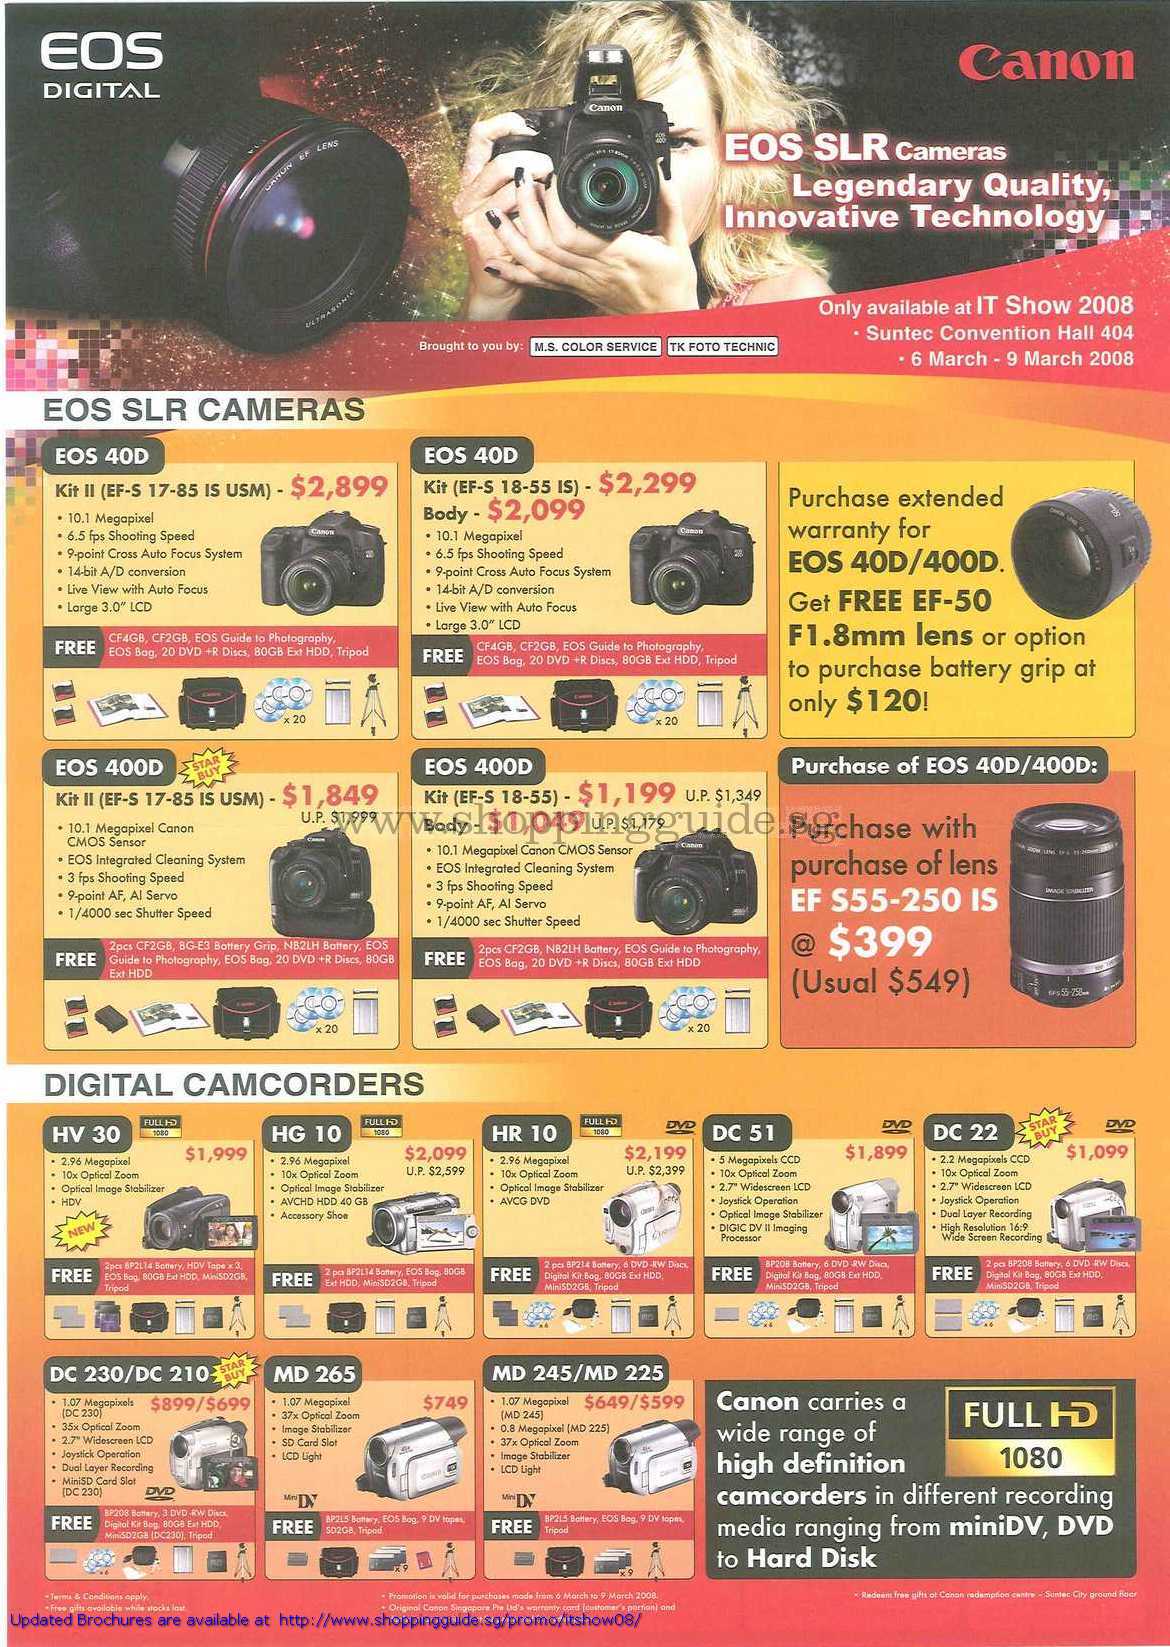 IT Show 2008 price list image brochure of Canon EOS SLR Digital Cameras 40D 400D Camcorders